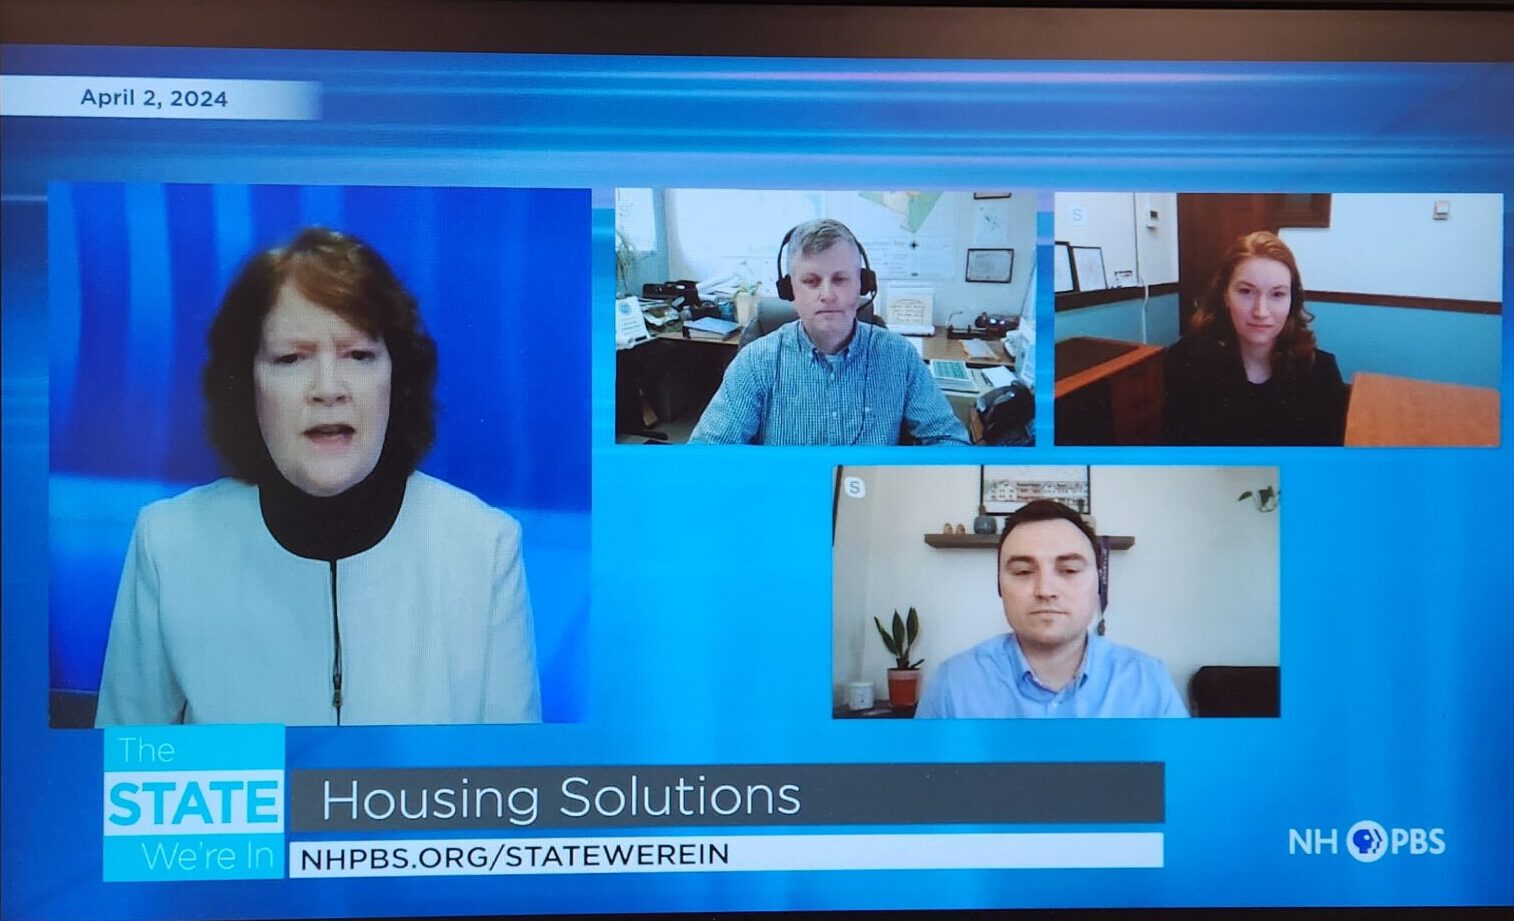 The State We’re In – Housing Solutions